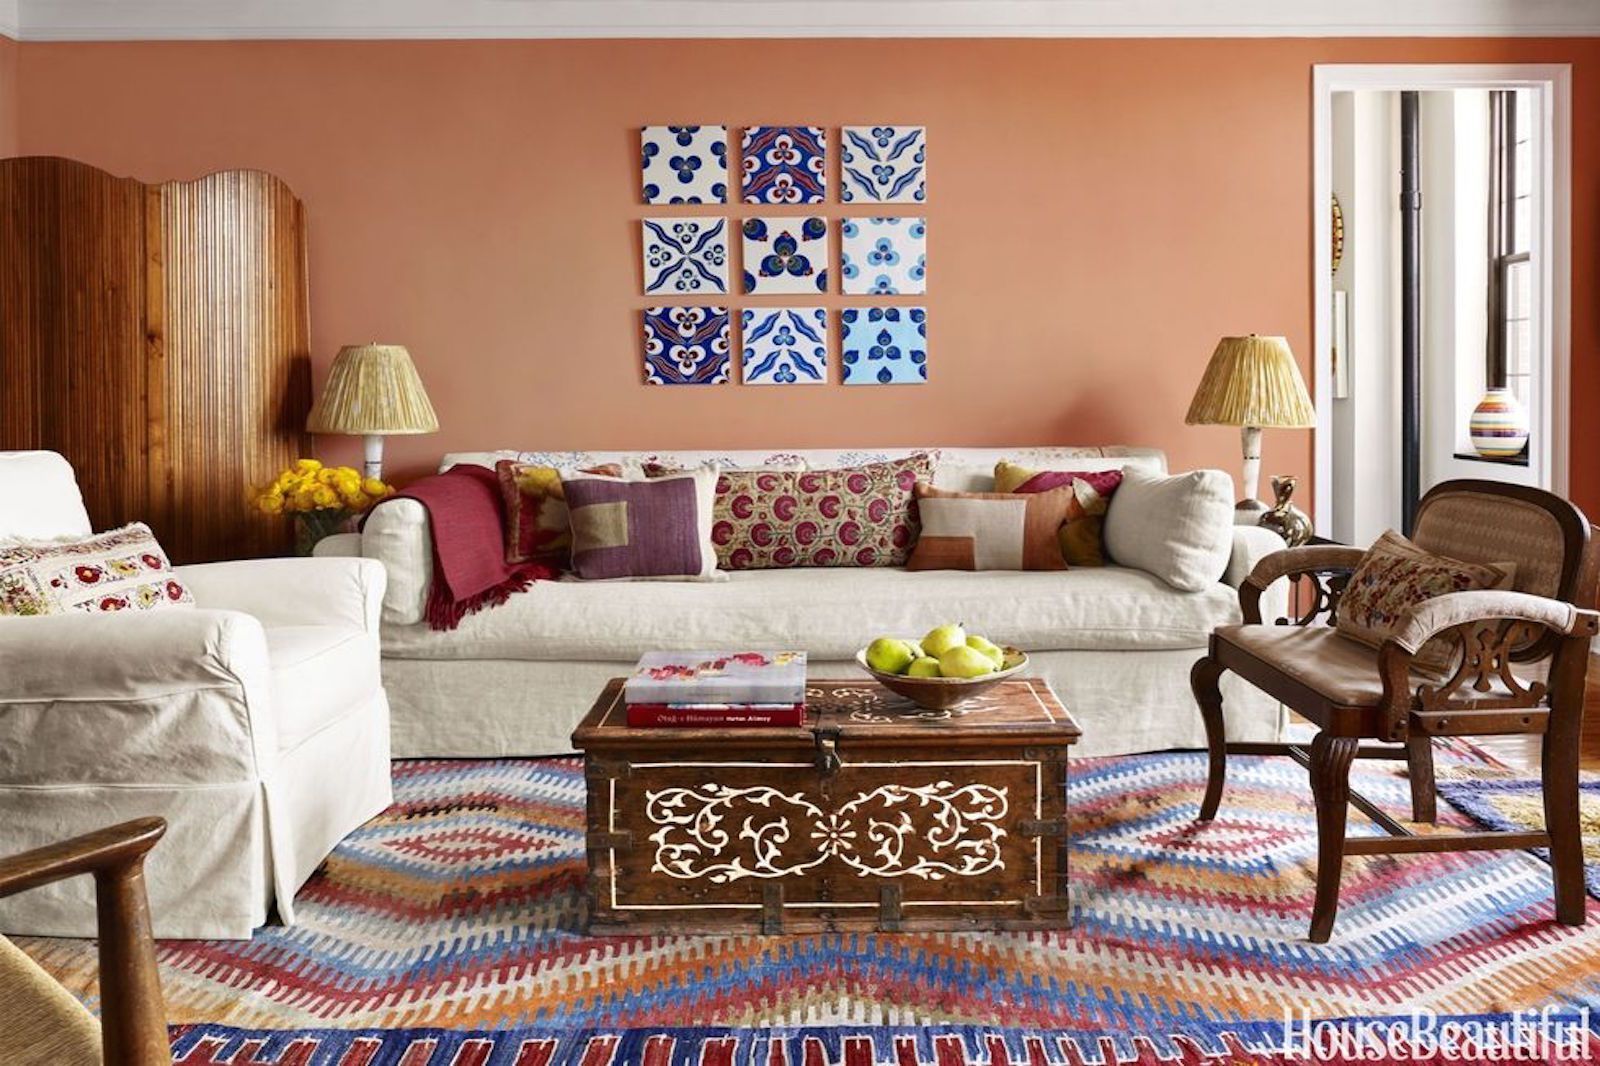 Colorful Ideas for Walls